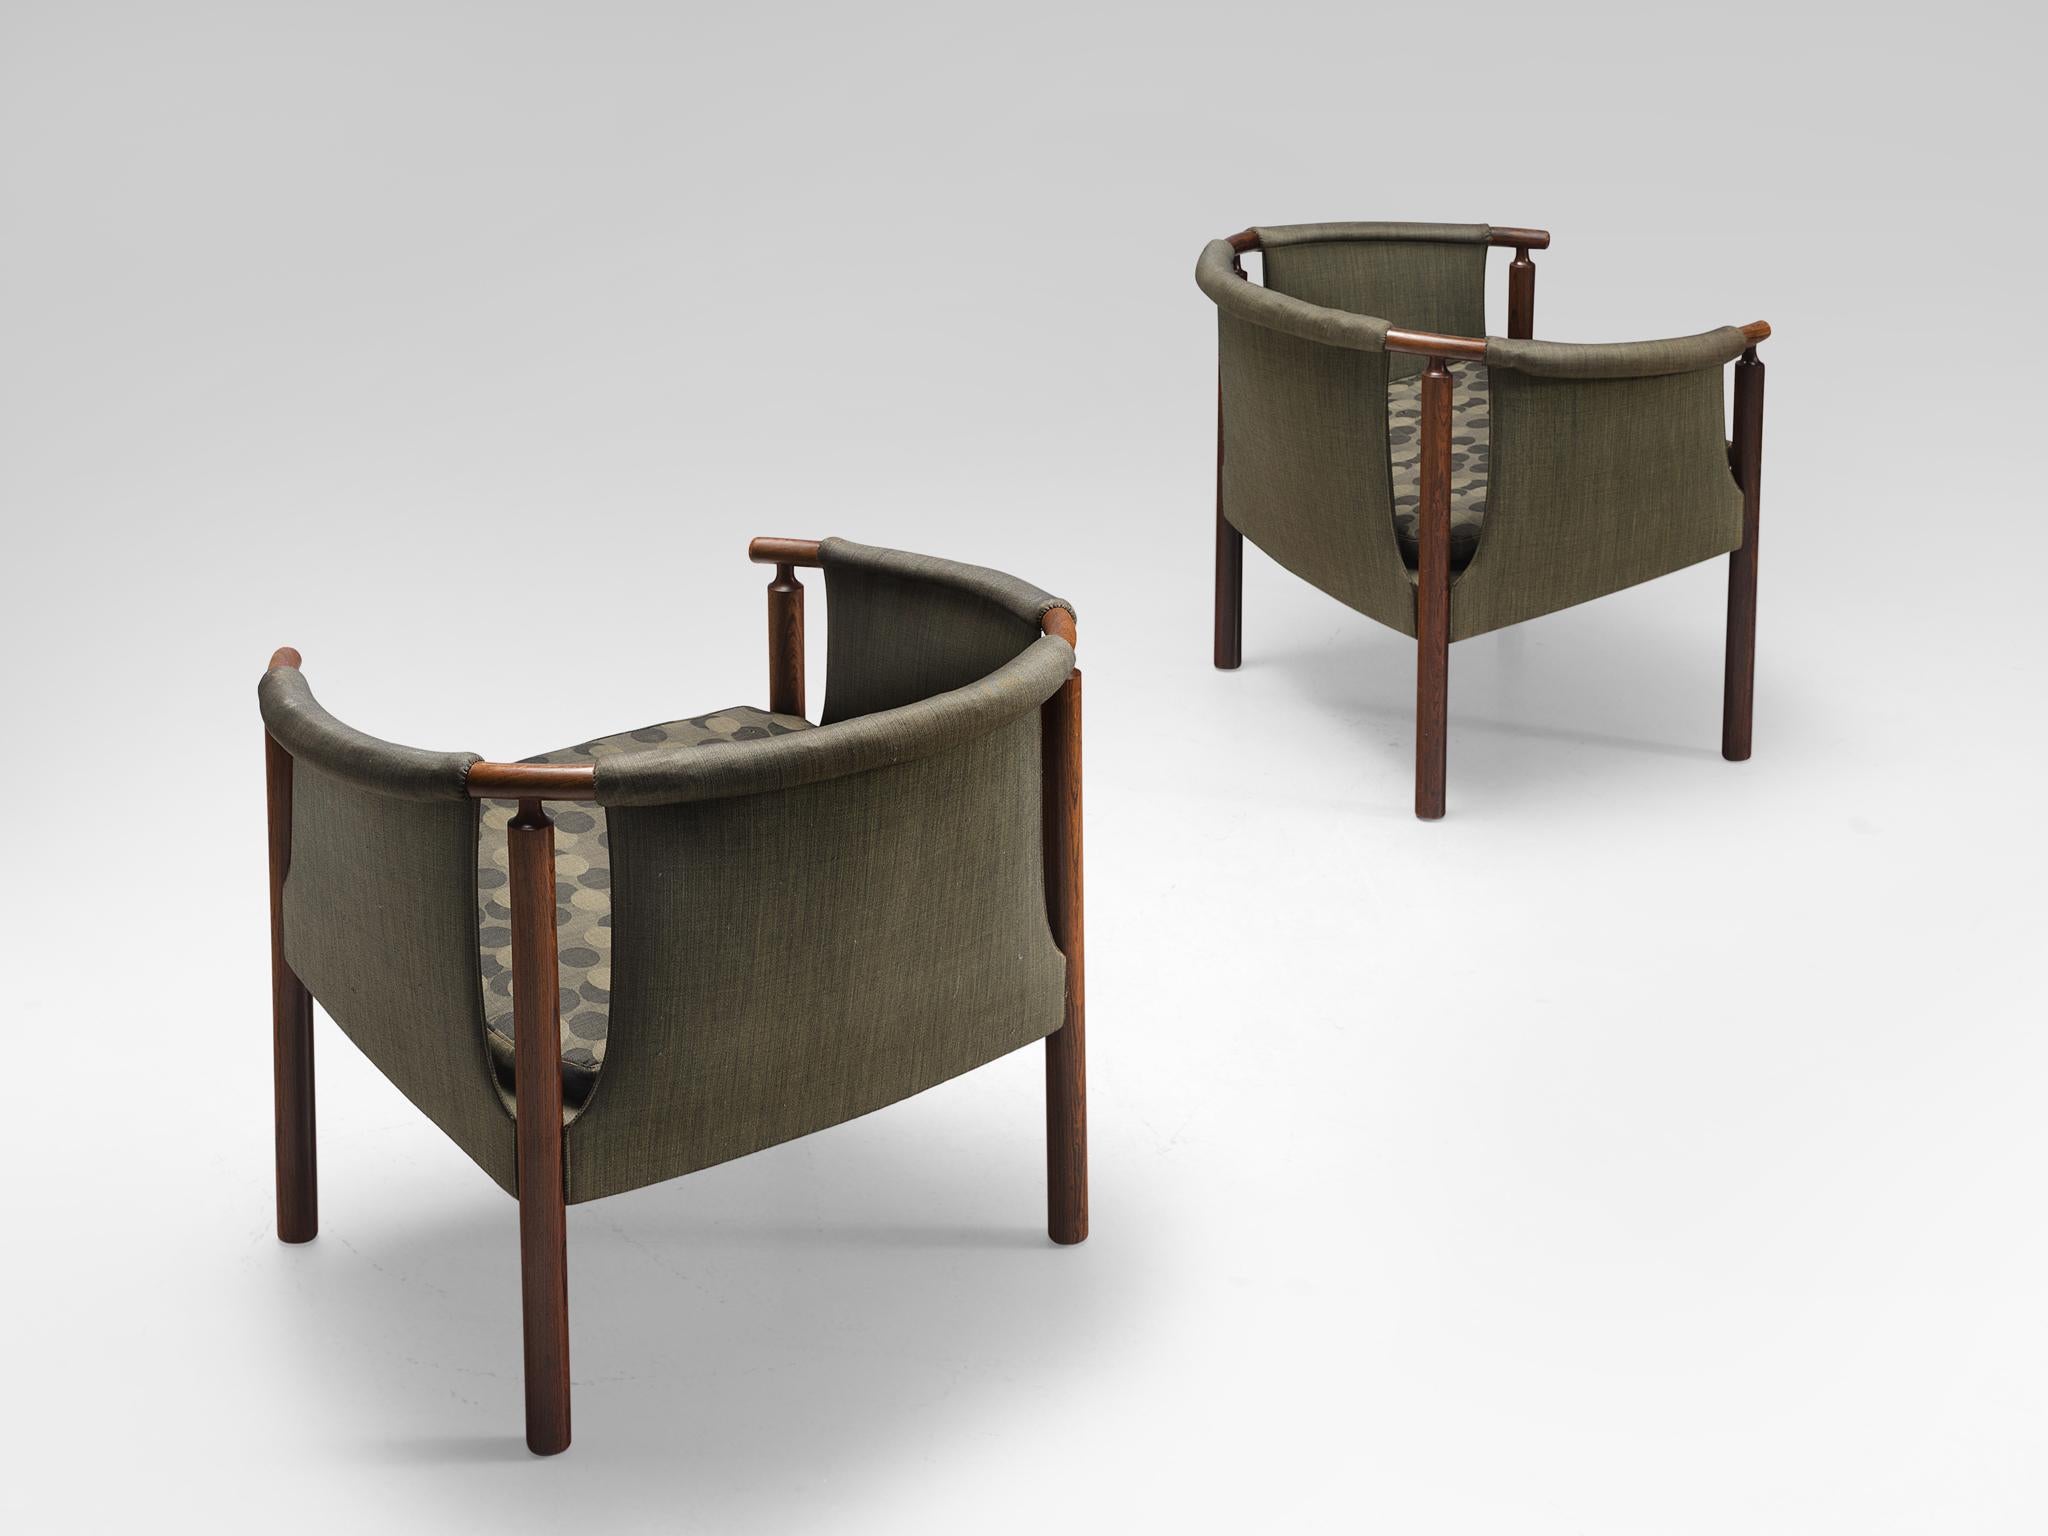 Arne Wahl Iversen for Poul M. Jessen, pair of rosewood armchairs 293/3 with green fabric, Denmark, 1950s.

This set of armchairs is upholstered with green fabric. The inventiveness of this chair lies in the open spaces next to the rosewood frame.